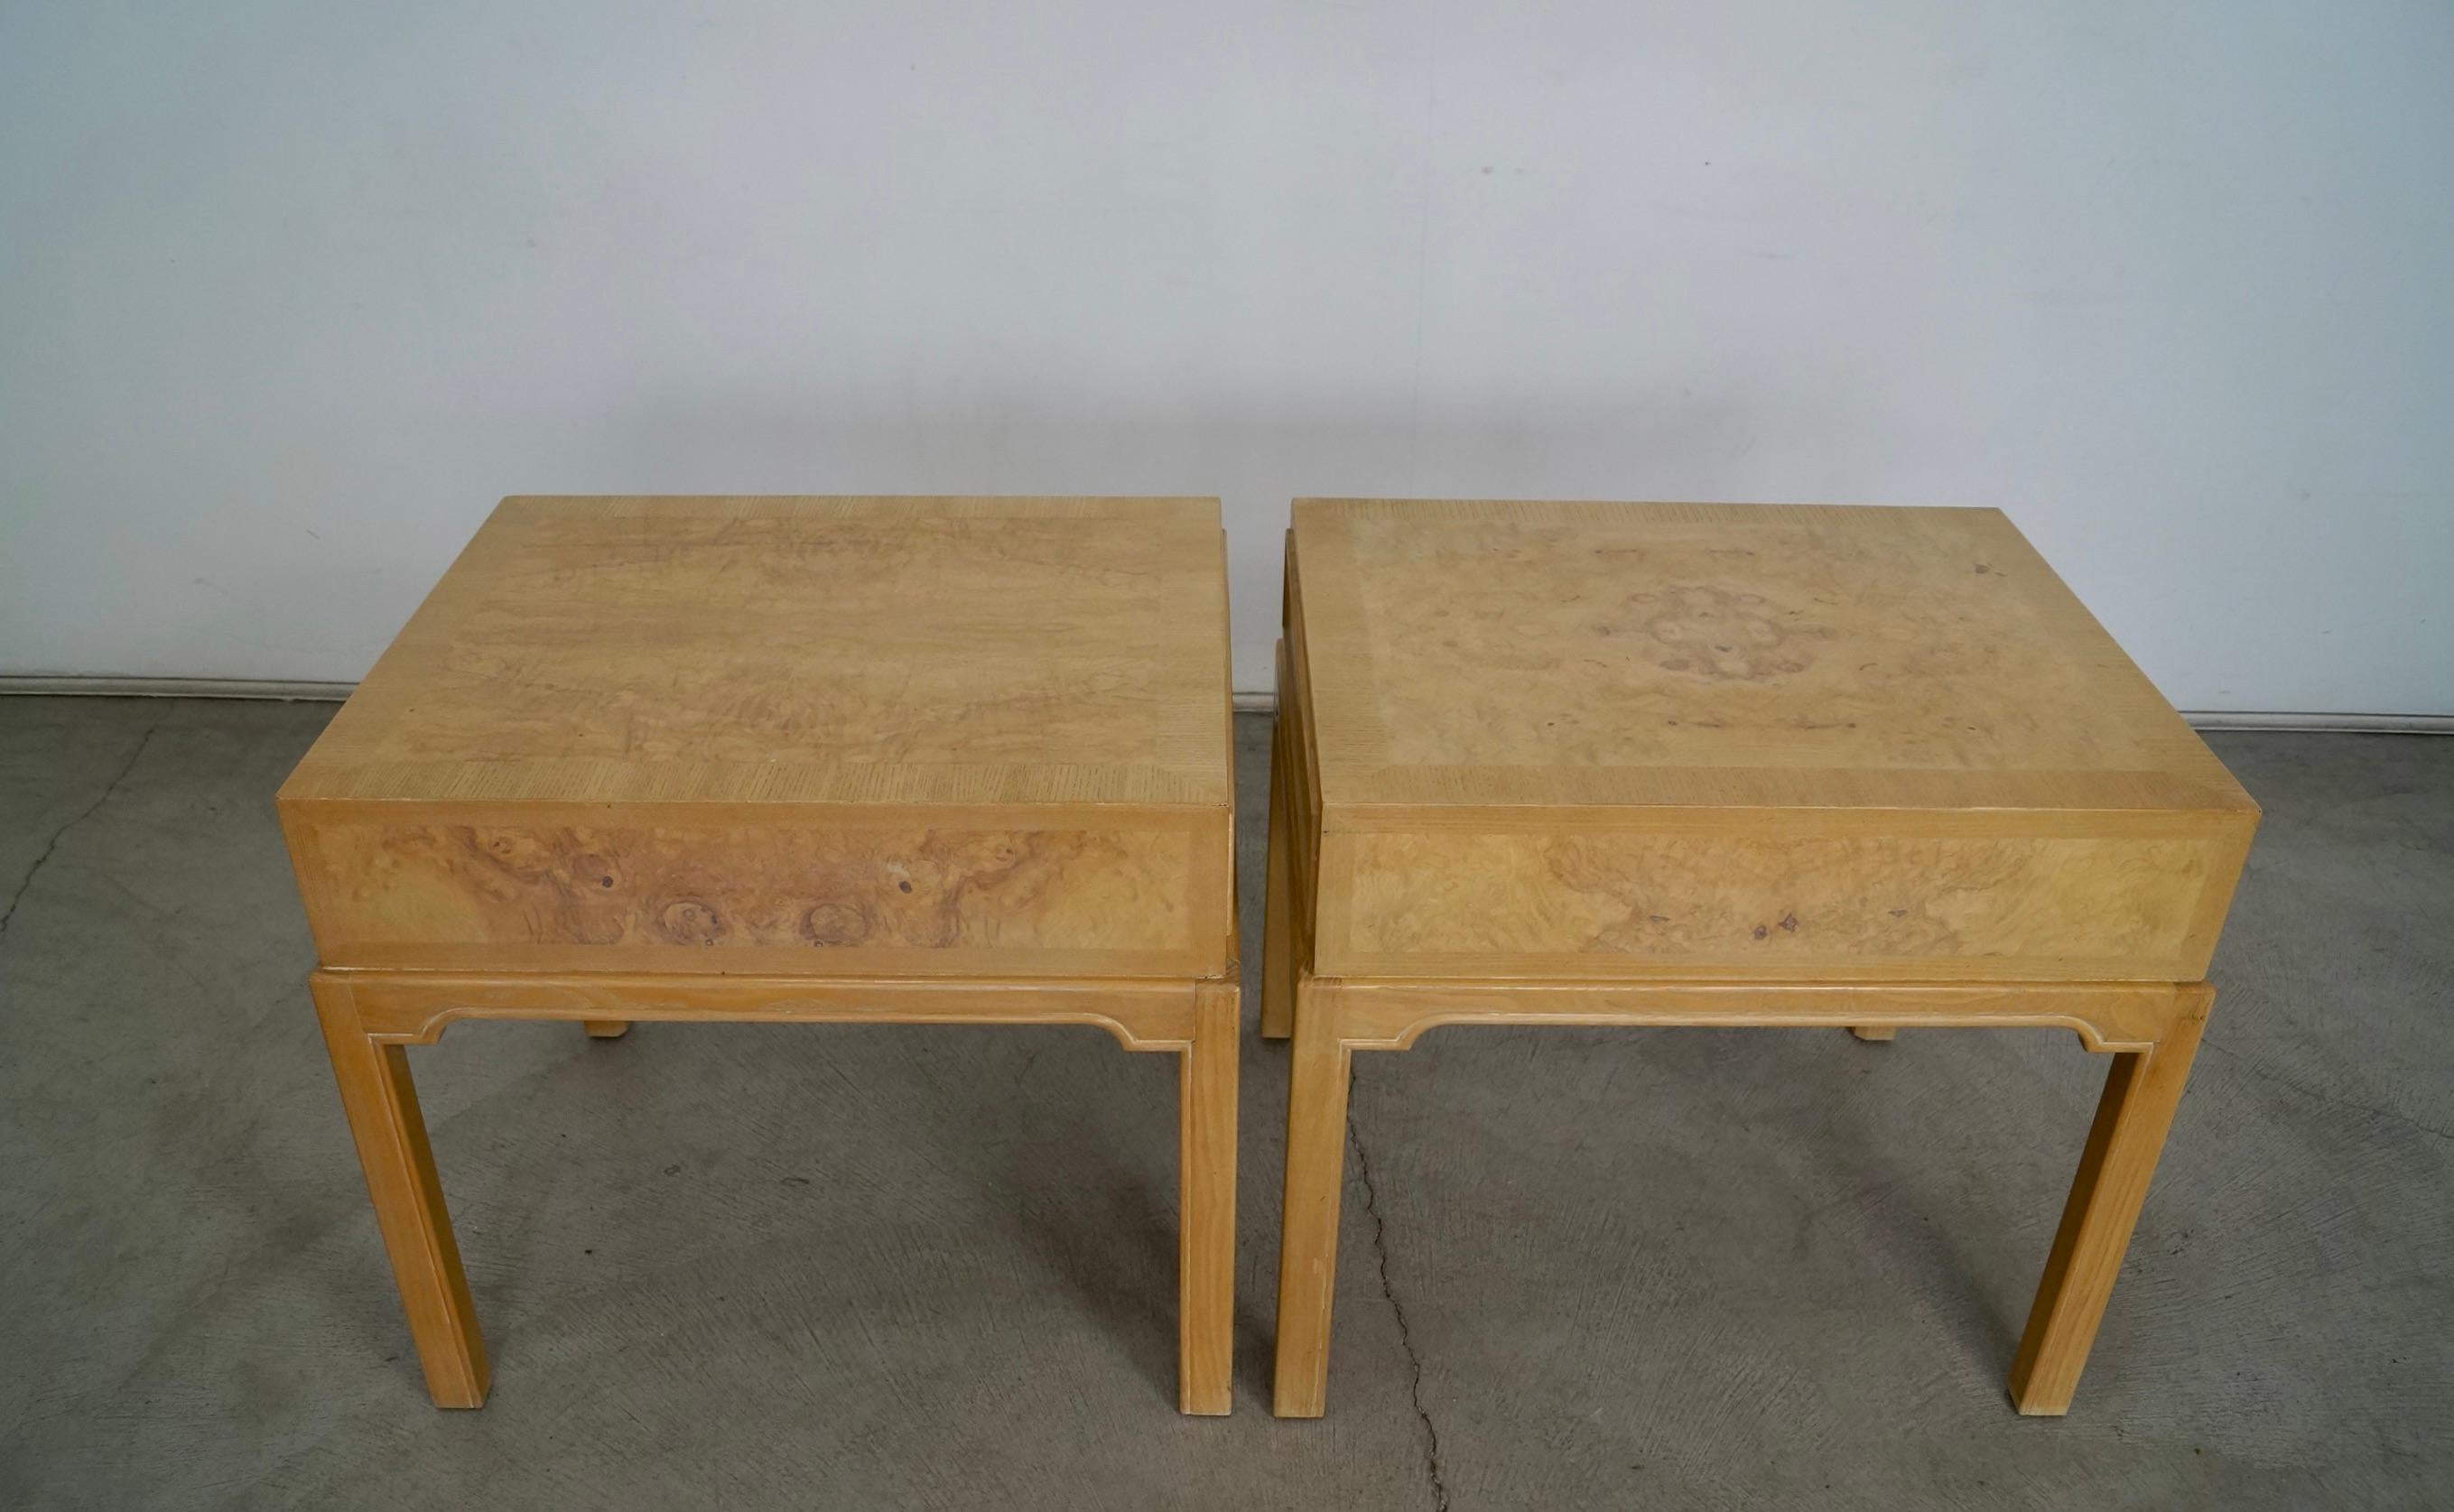 Vintage Burl Wood Drexel End Tables - A Pair In Excellent Condition For Sale In Burbank, CA